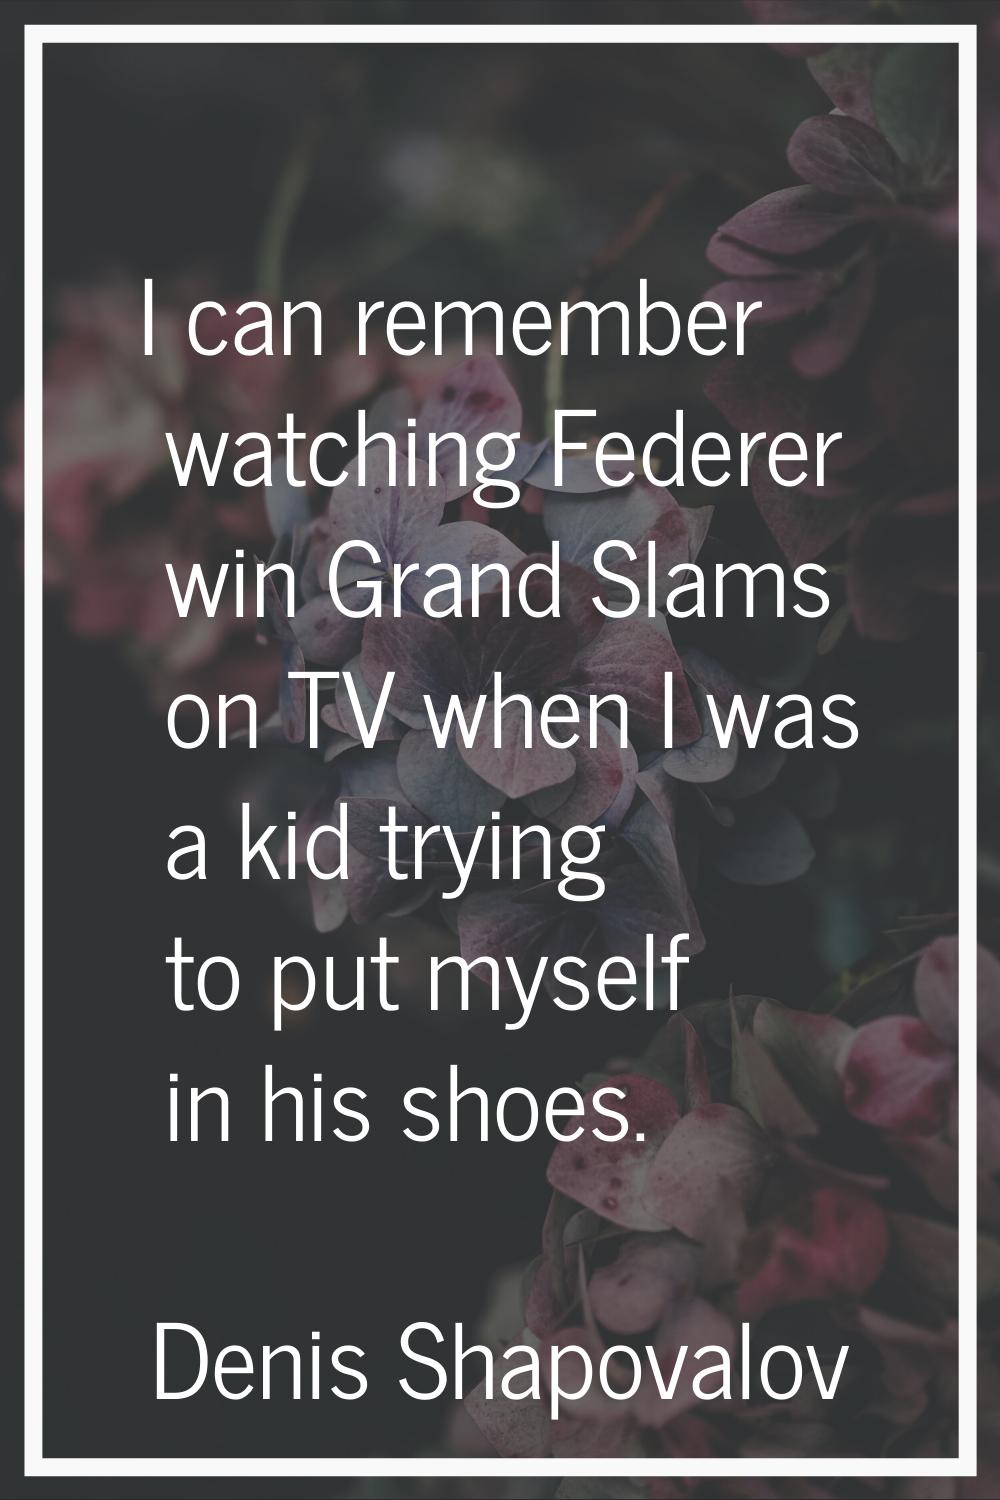 I can remember watching Federer win Grand Slams on TV when I was a kid trying to put myself in his 